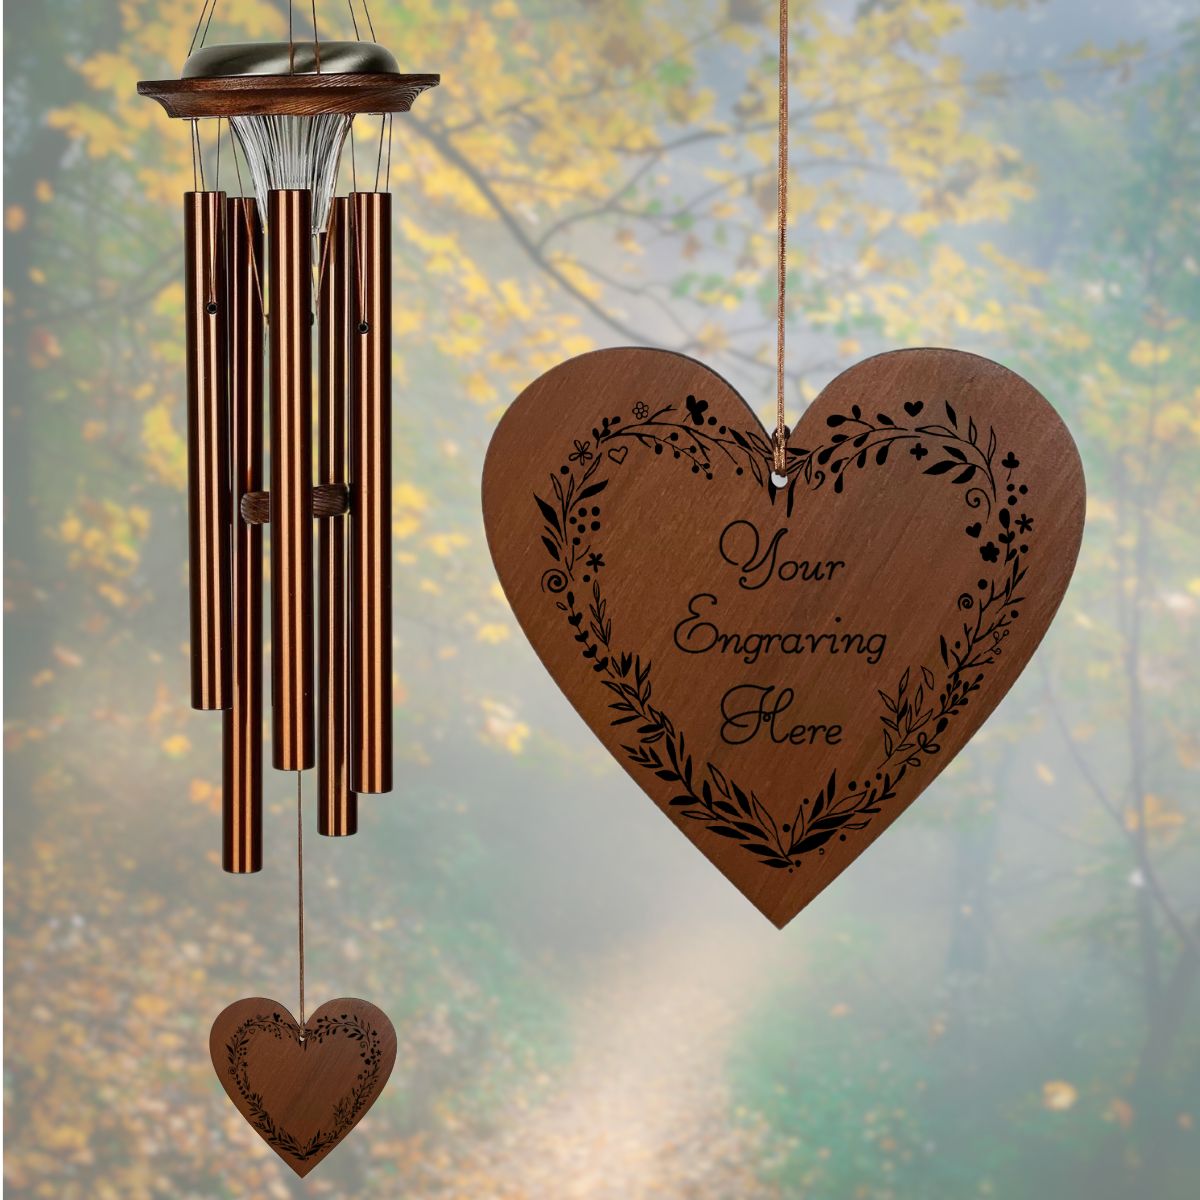 Moonlight Solar Chime 29 Inch Wind Chime - Engravable Floral Wreath Heart Sail - Bronze